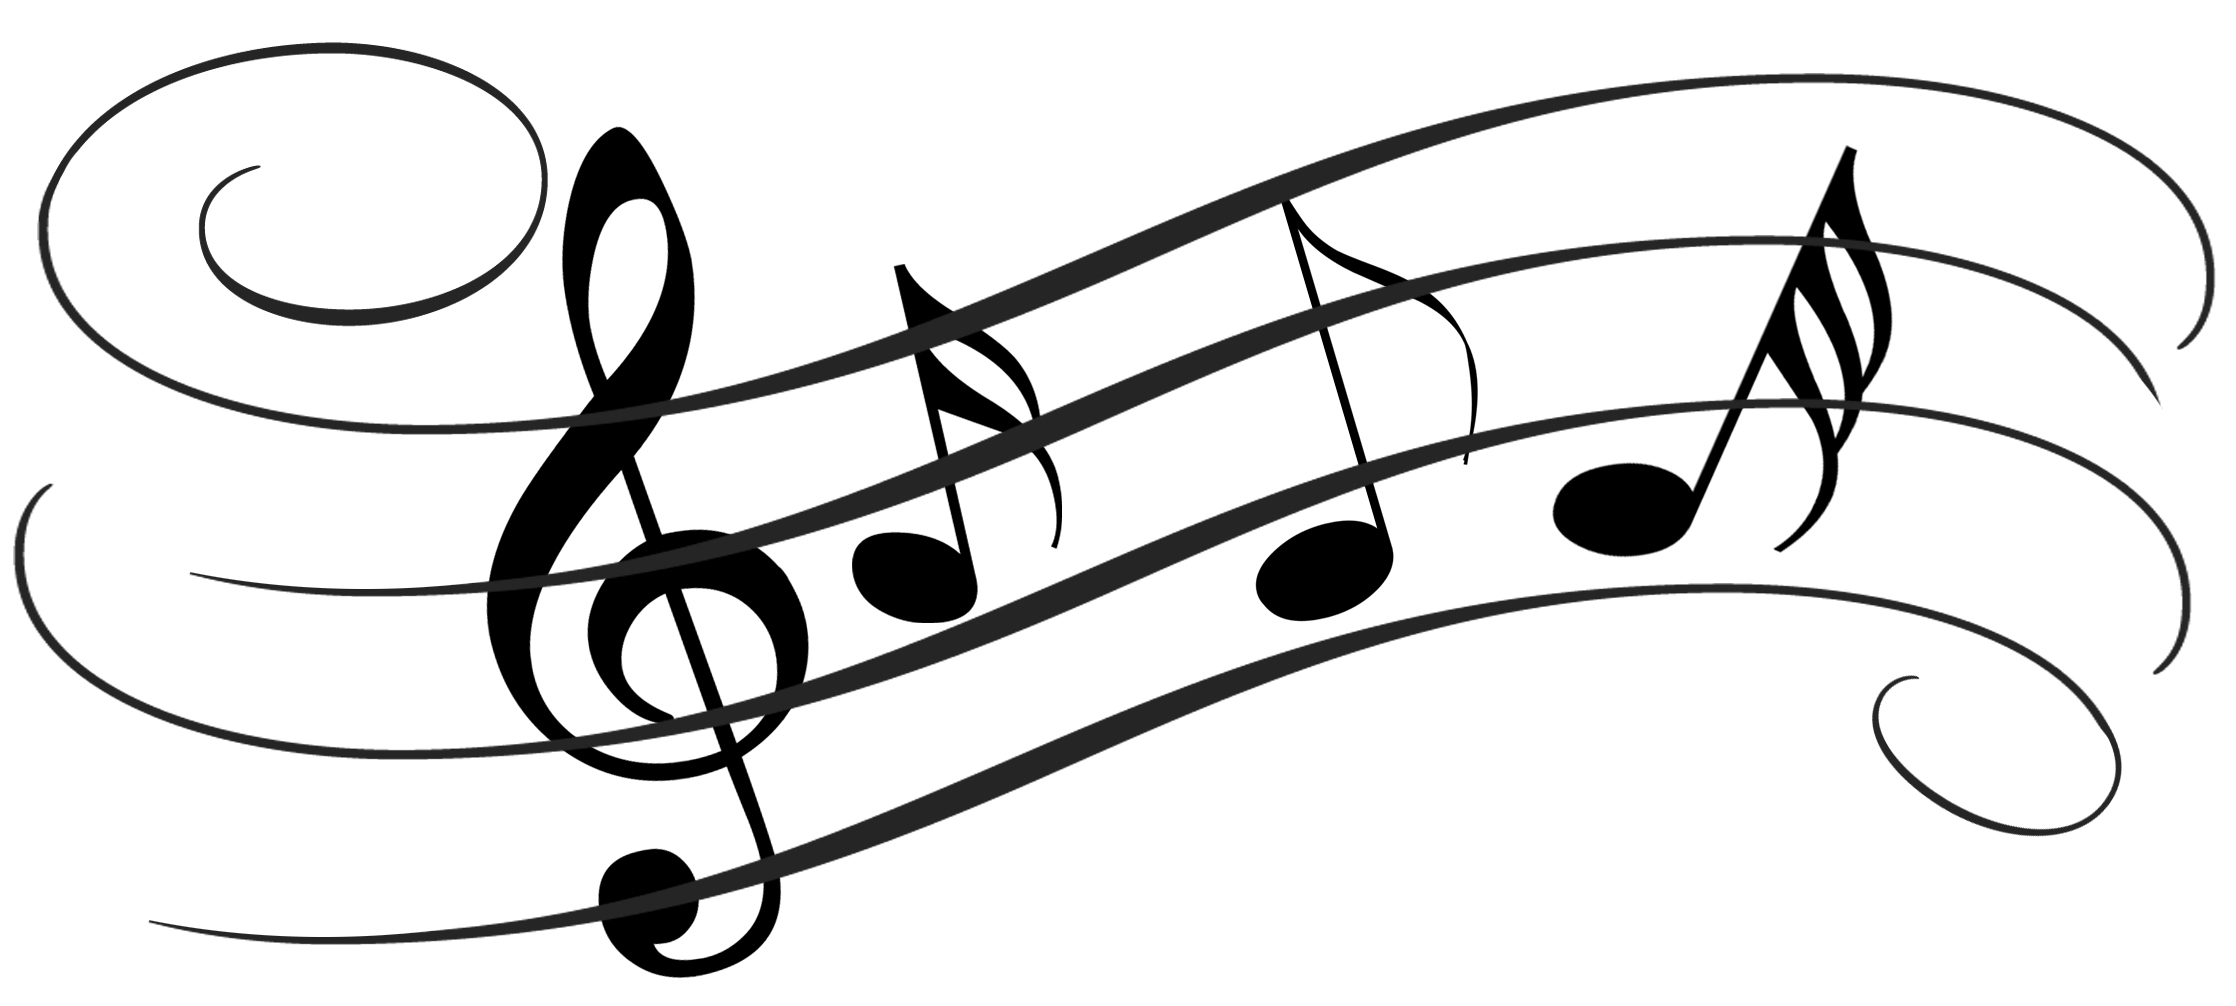 Music notes clip art free clipart images 4